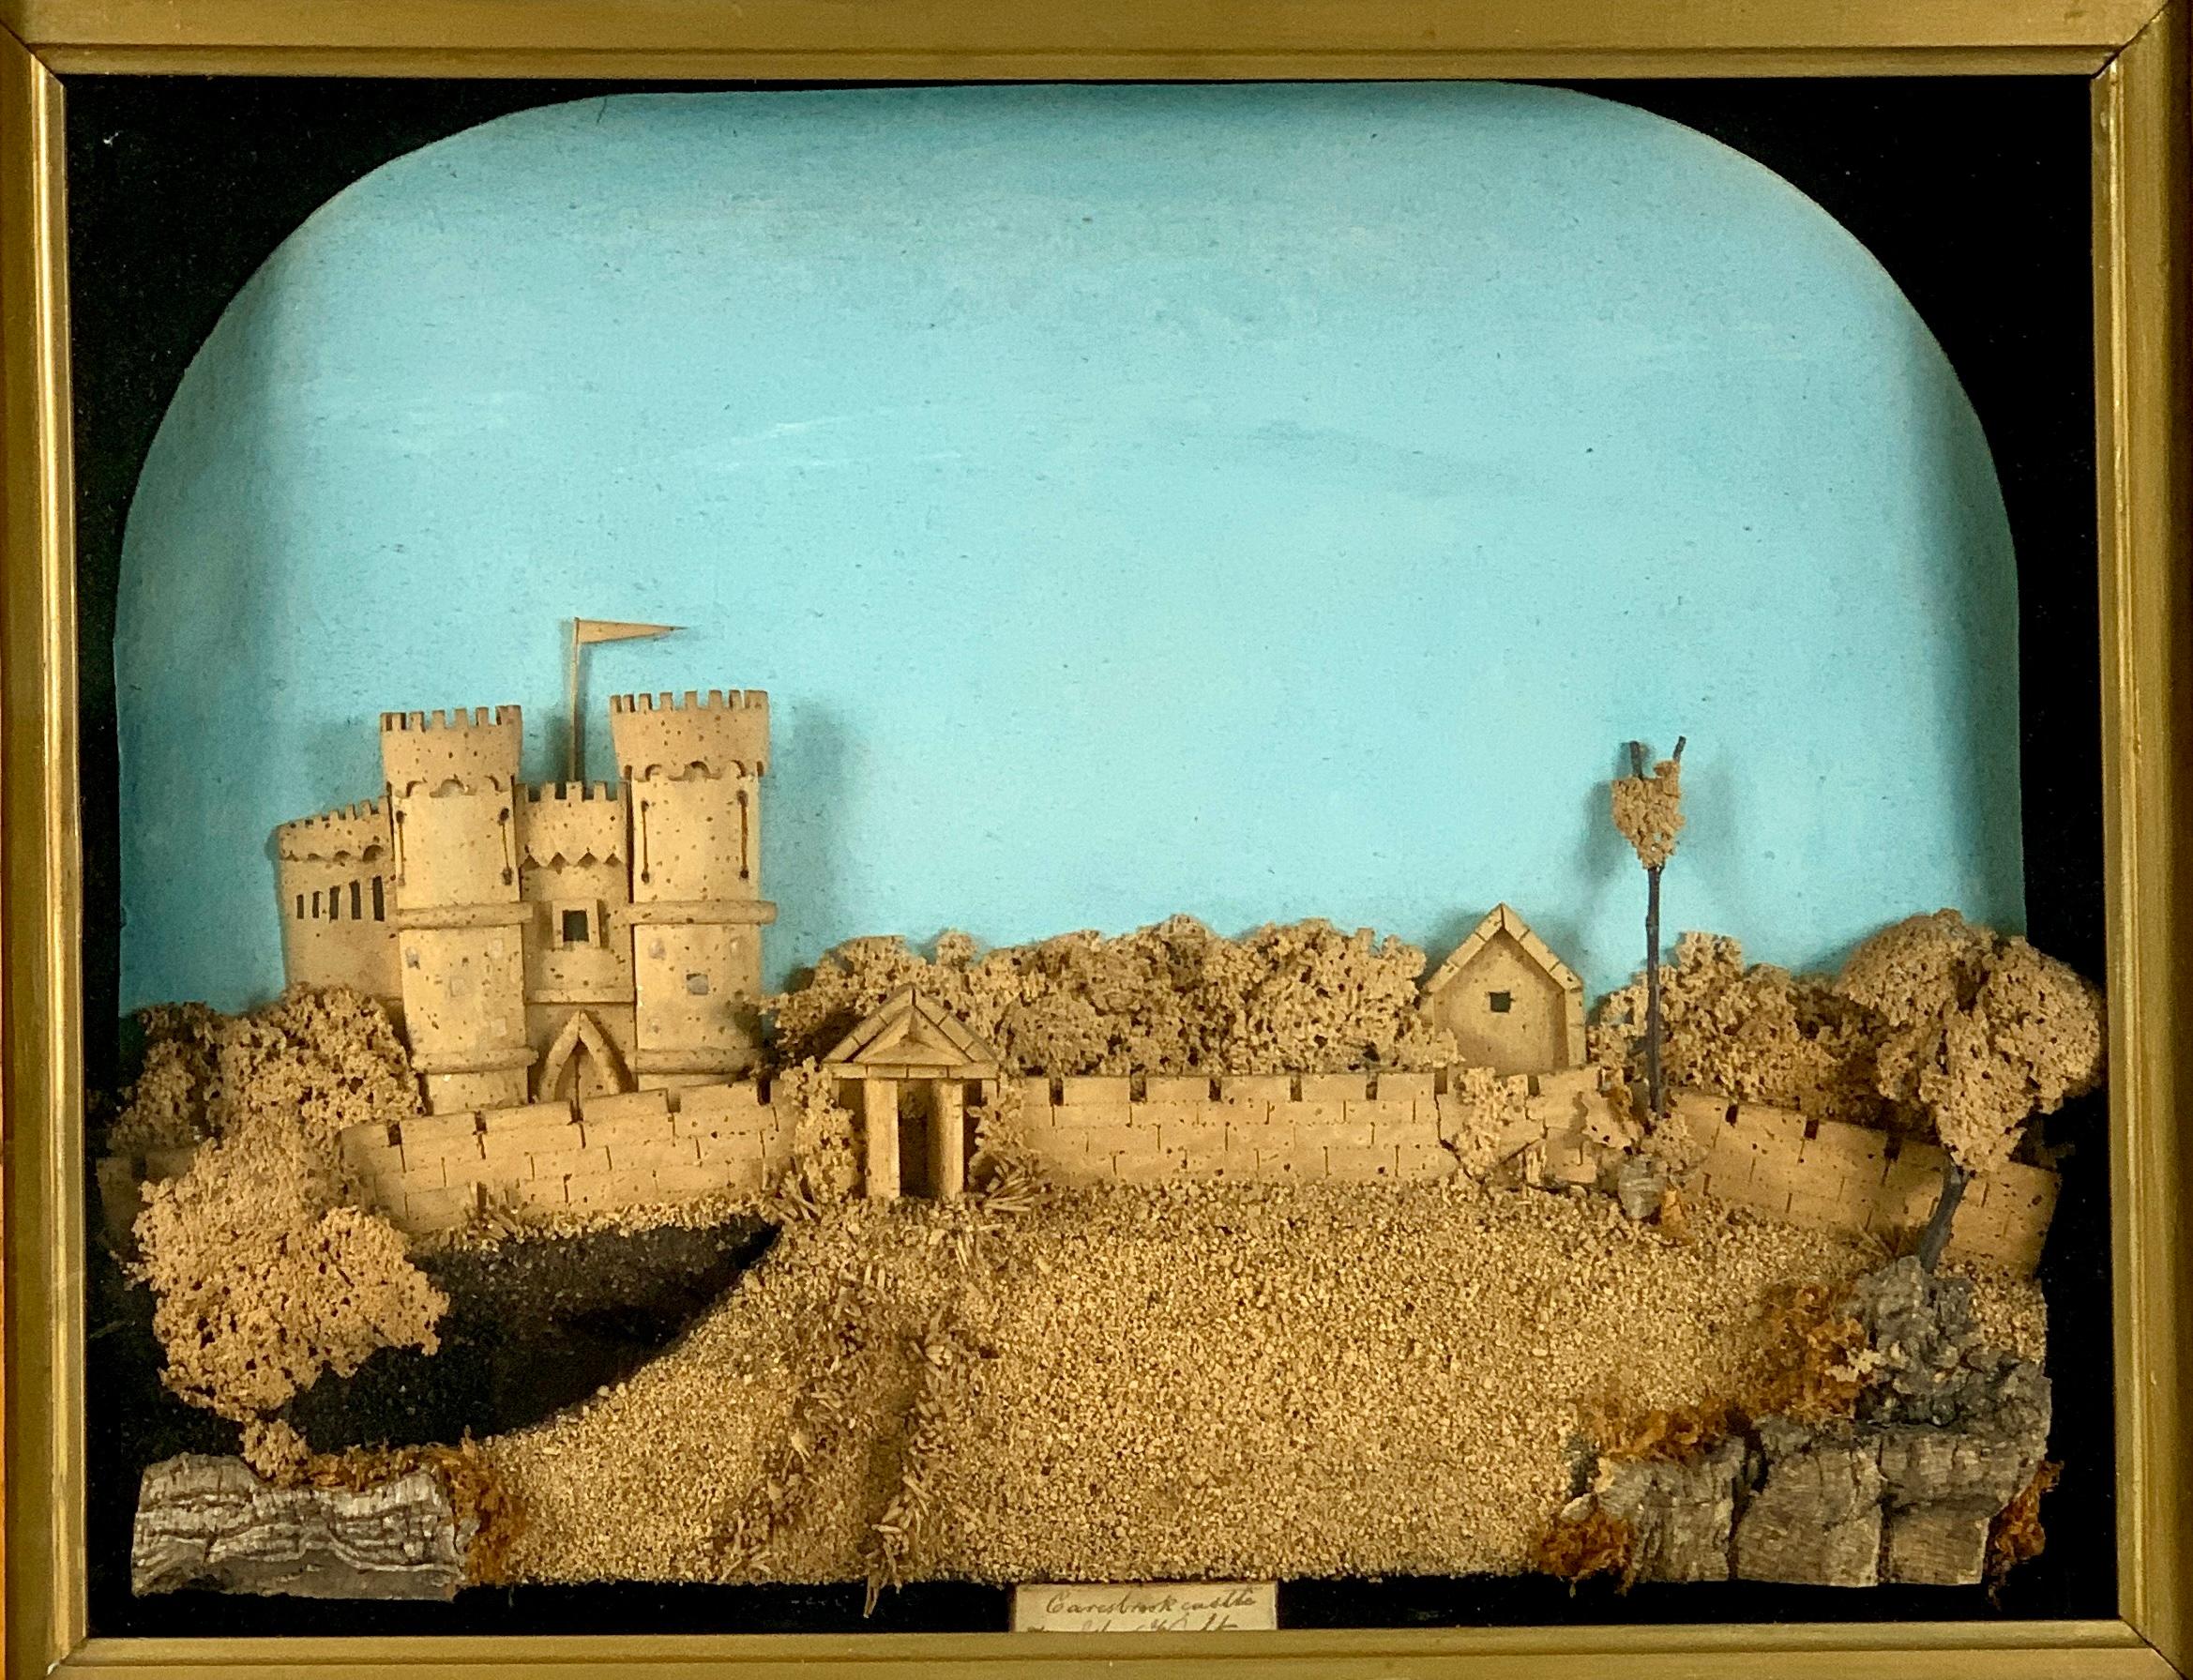  This hand-crafted cork work shows a romantic scene of Carisbrooke Castle on the Isle of Wight in a charming diorama. 
The castle is perched atop a mountain complete with a long protective wall and an open gate. 
The artist's intricate cutting and